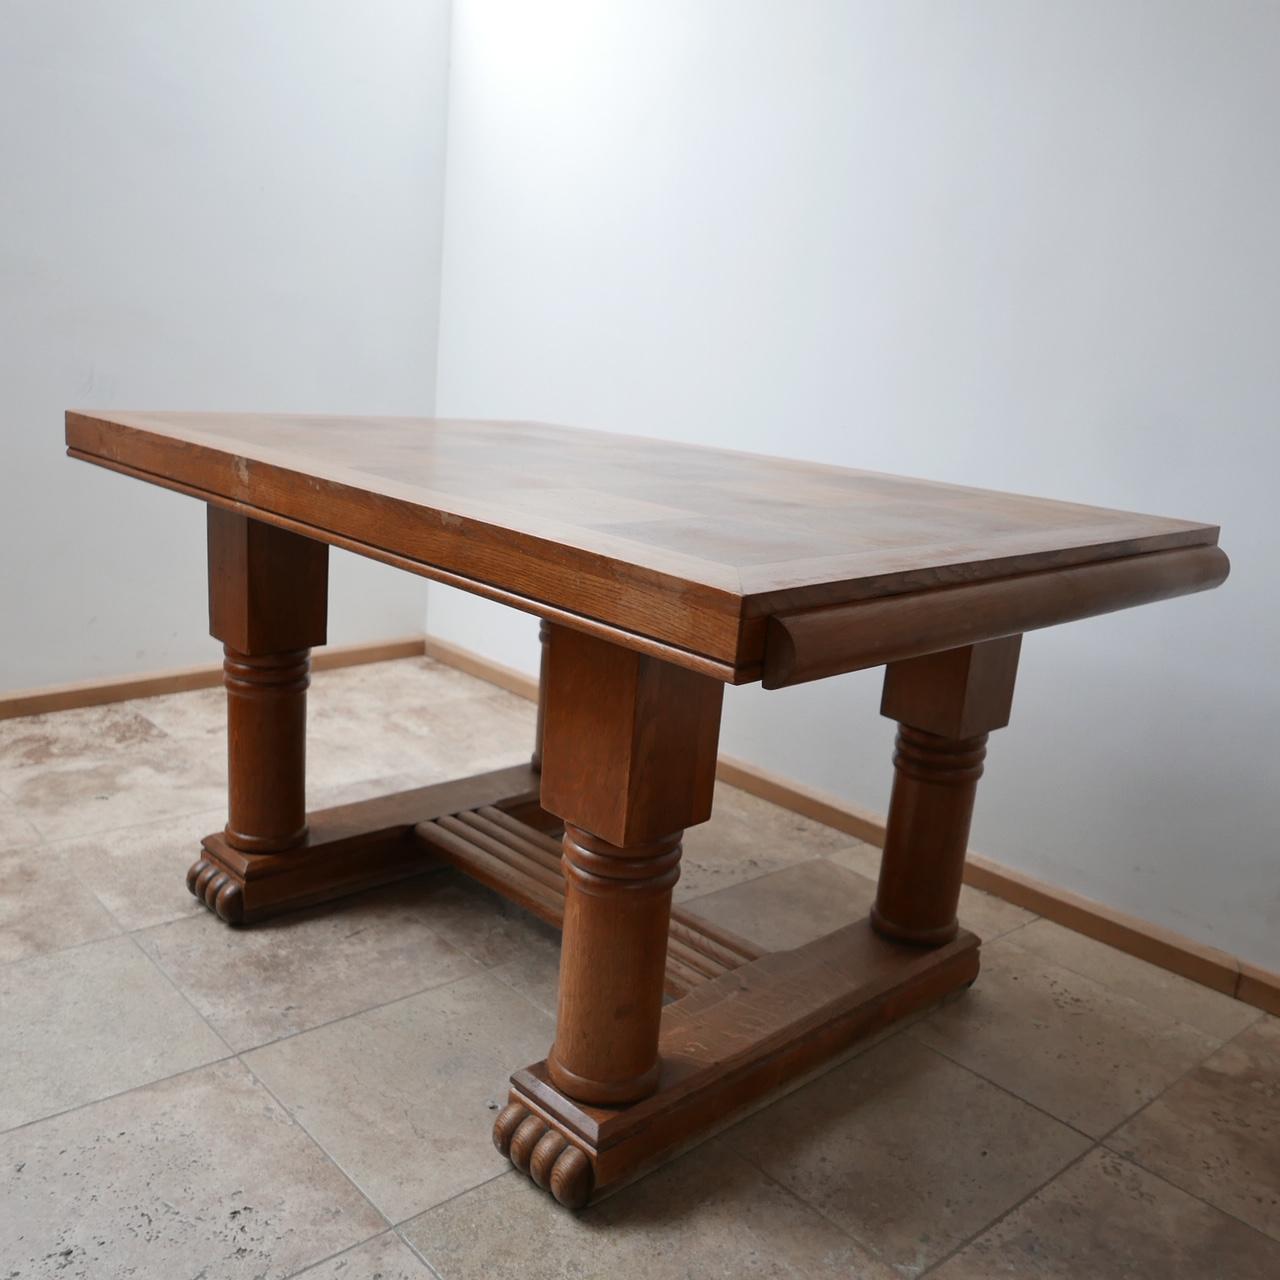 An Art Deco style dining table. 

France, c1940s. 

Oak, the top is formed in a chequer board manner, the base is particularly lovely.

Generally good condition, there is some scuffs and wear commensurate with age. 

There is a simple